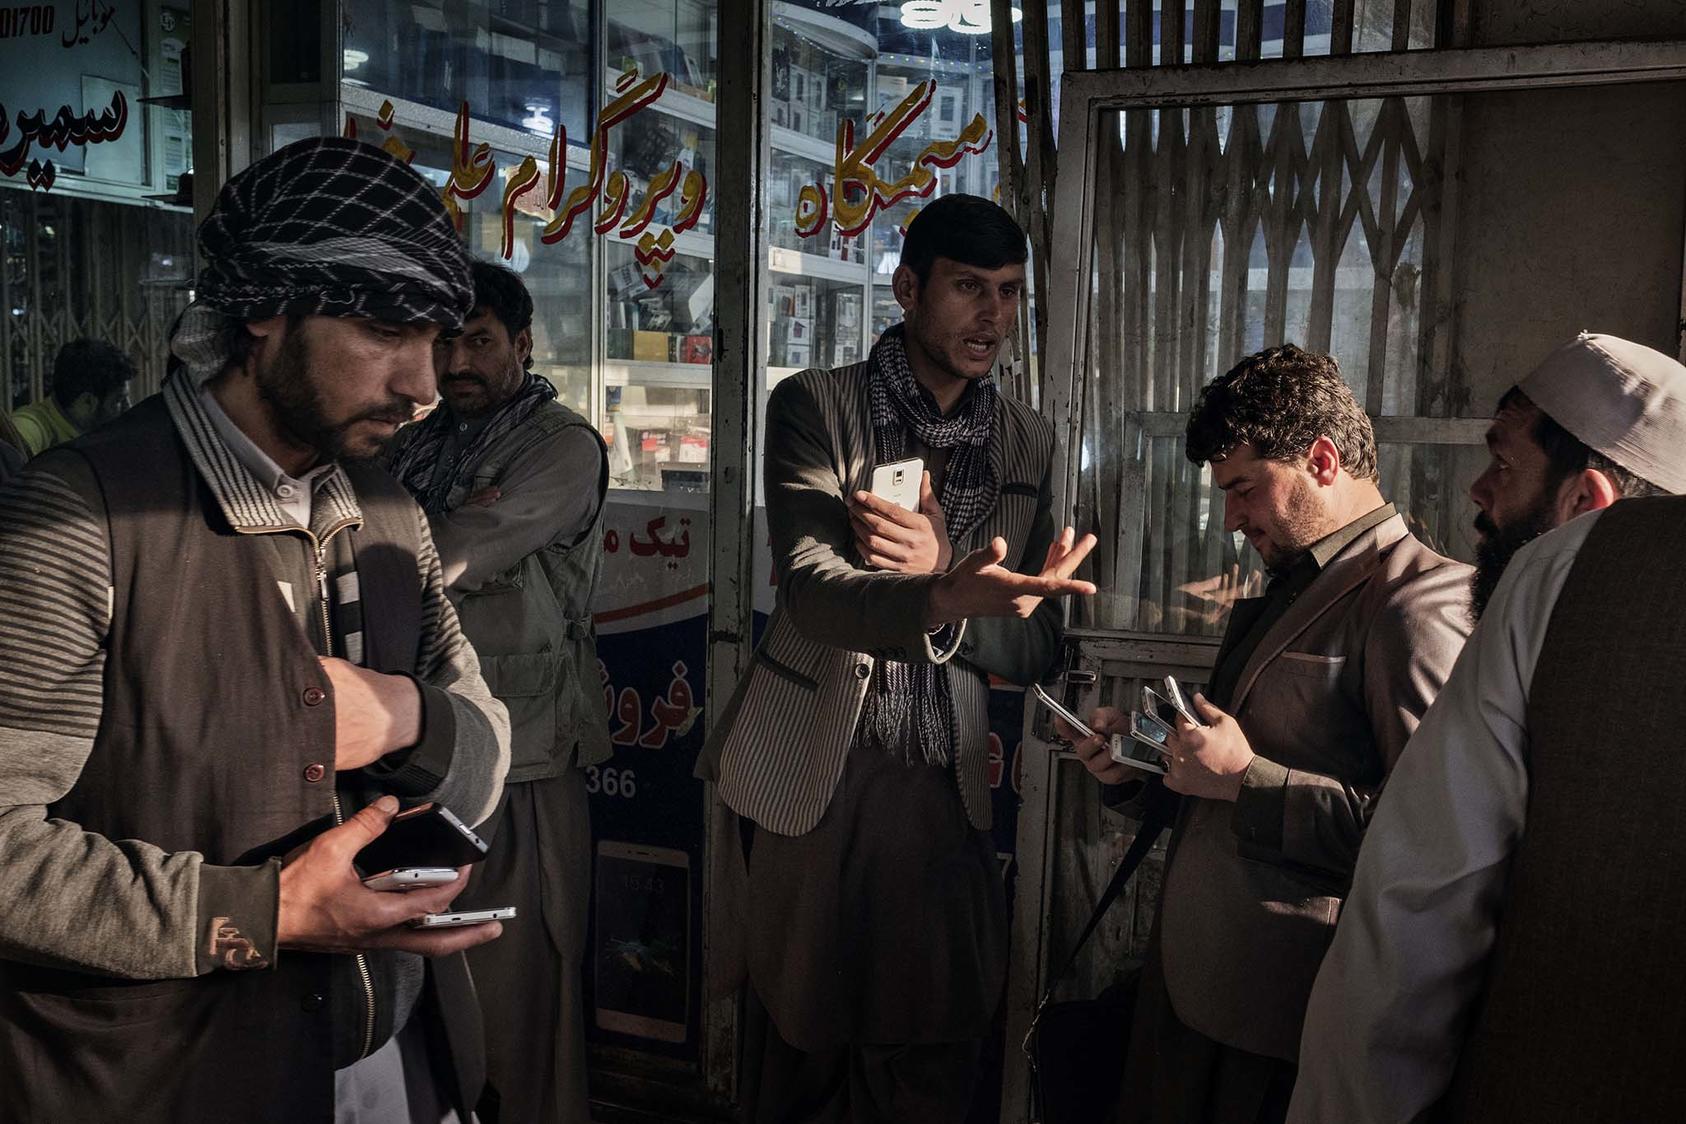 Afghans buy and sell used and new mobile phones, SIM cards and phone credit cards at a market in Kabul, Afghanistan, March 31, 2016. (Adam Ferguson/The New York Times)